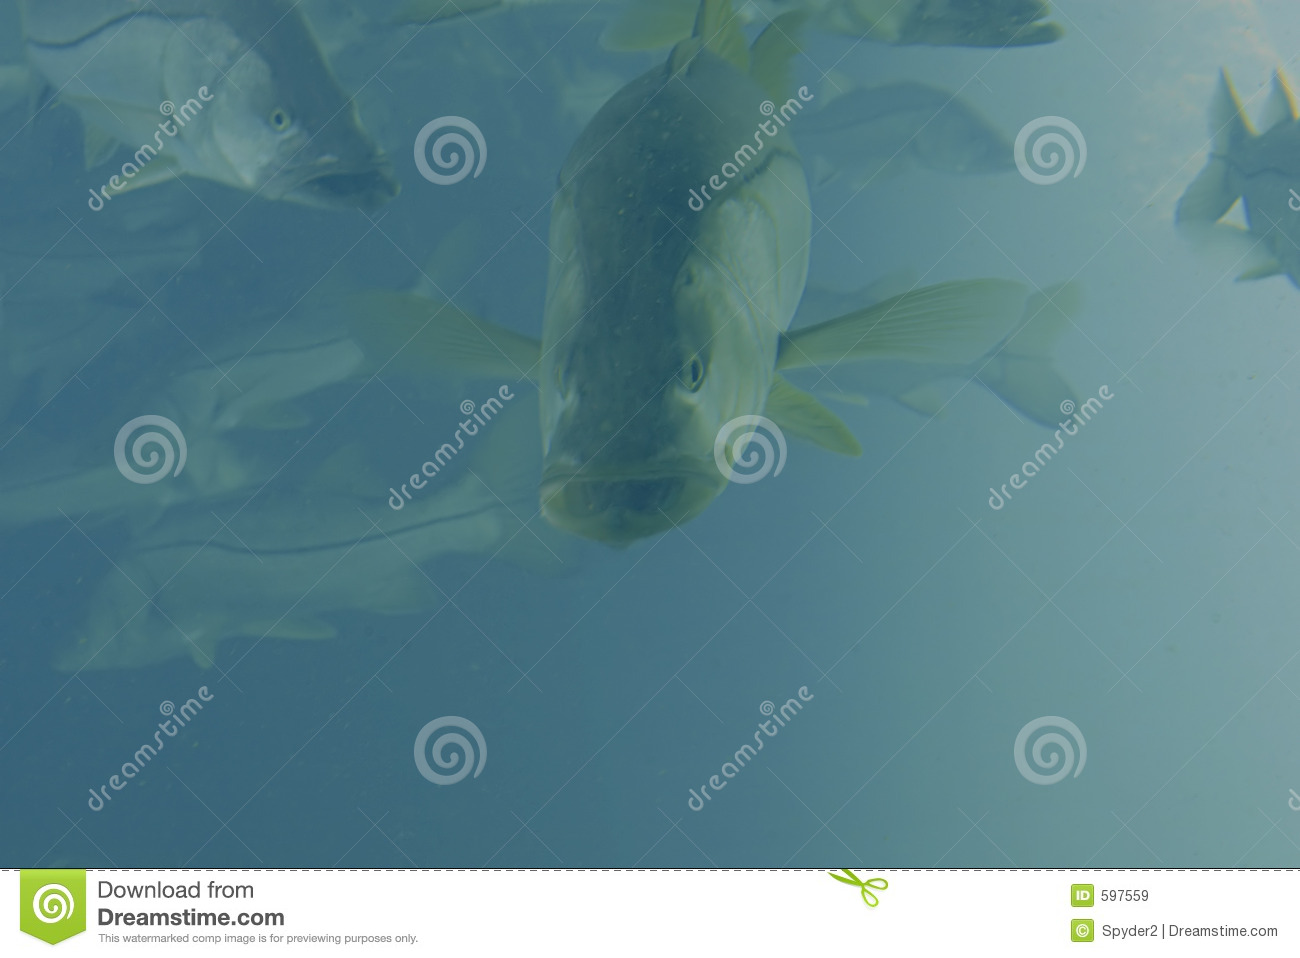 Snook Royalty Free Stock Images   Image  597559